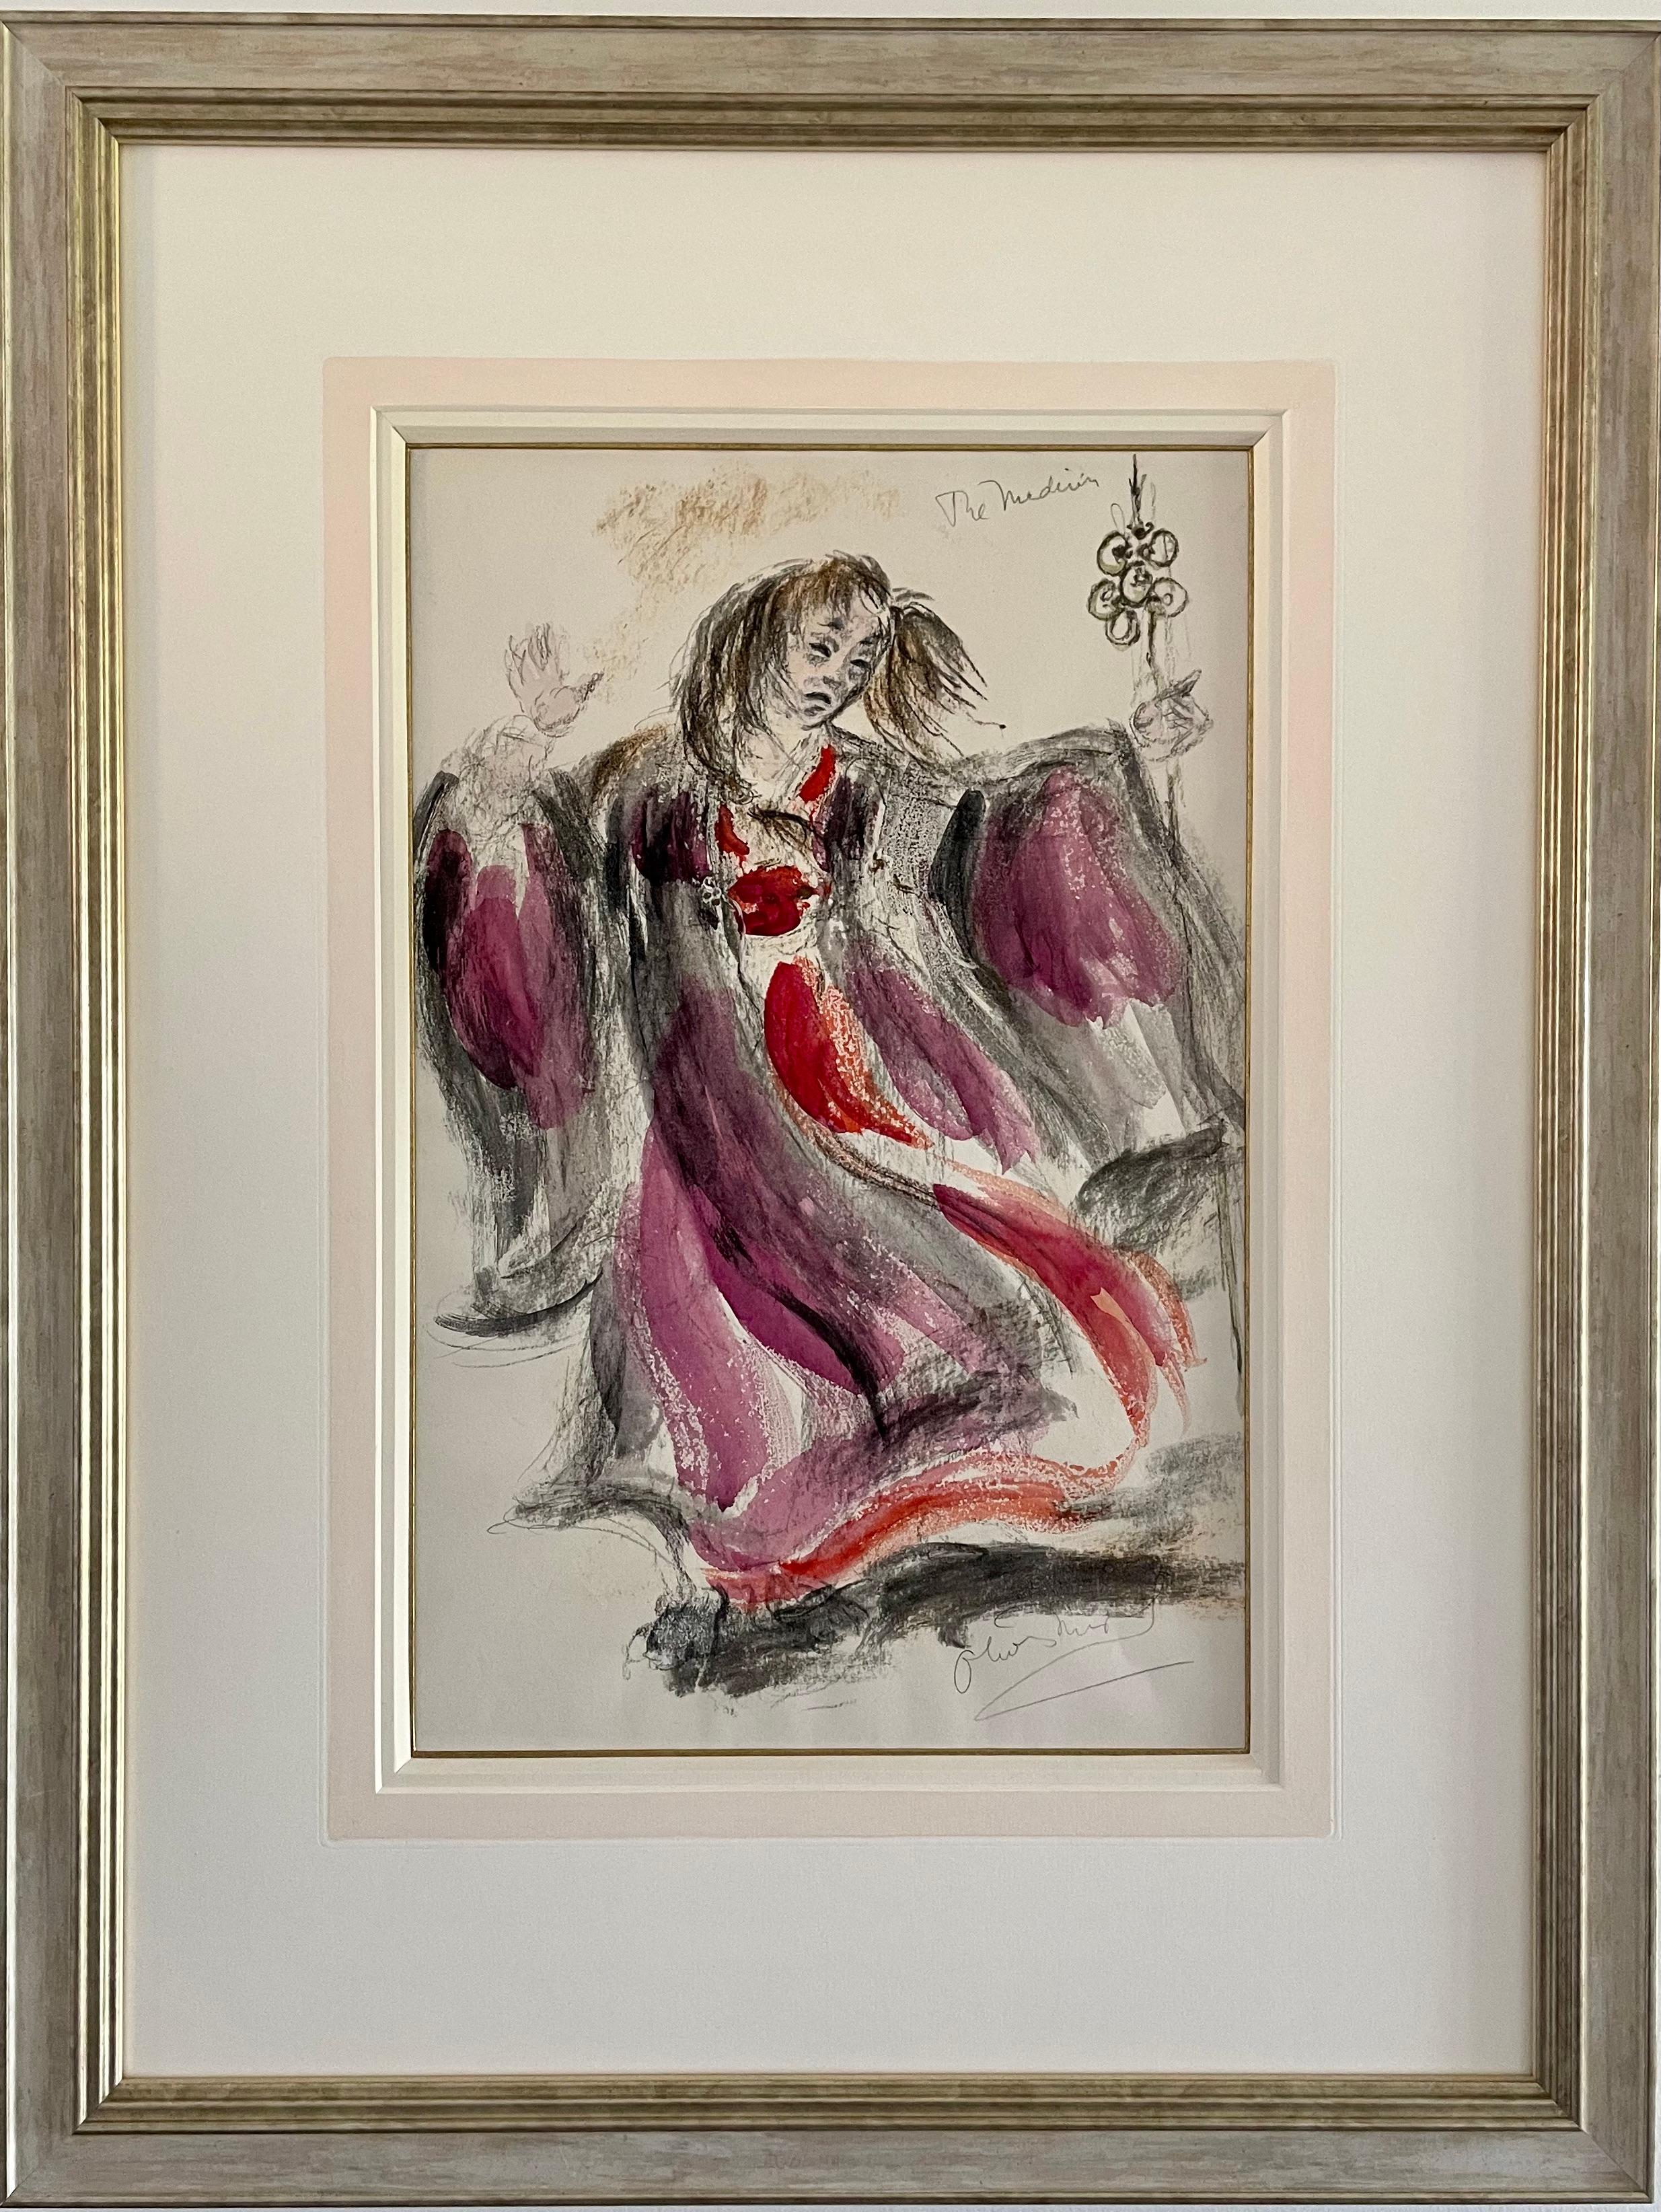 OLIVER MESSEL
(1904-1978)

The Medium – Costume Design for Peter Glenville’s Rashomon, Performed at the Music Box, New York, 1959

Signed l.r.:  Oliver Messel and inscribed u.r.: The Medium
Watercolour and chalks over traces of pencil
Framed

36 by